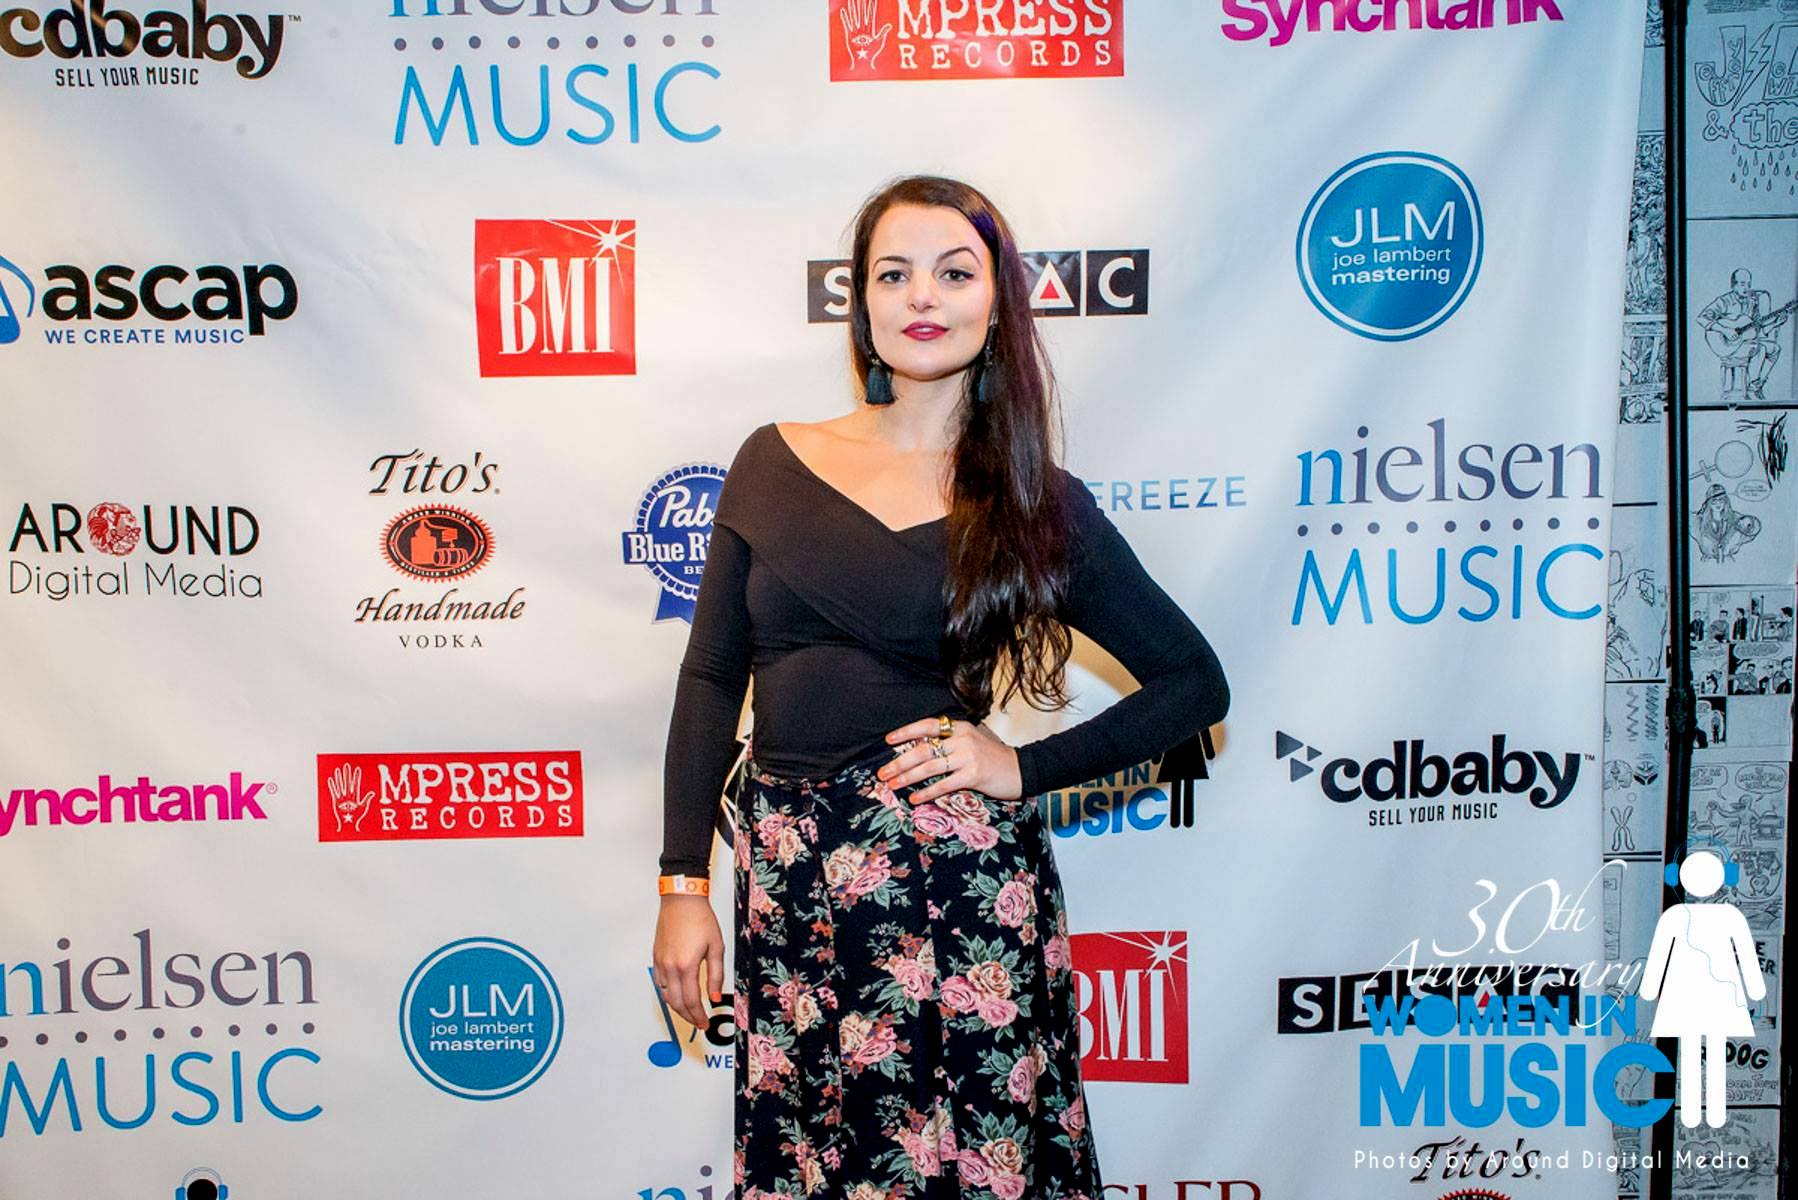 At Women in Music